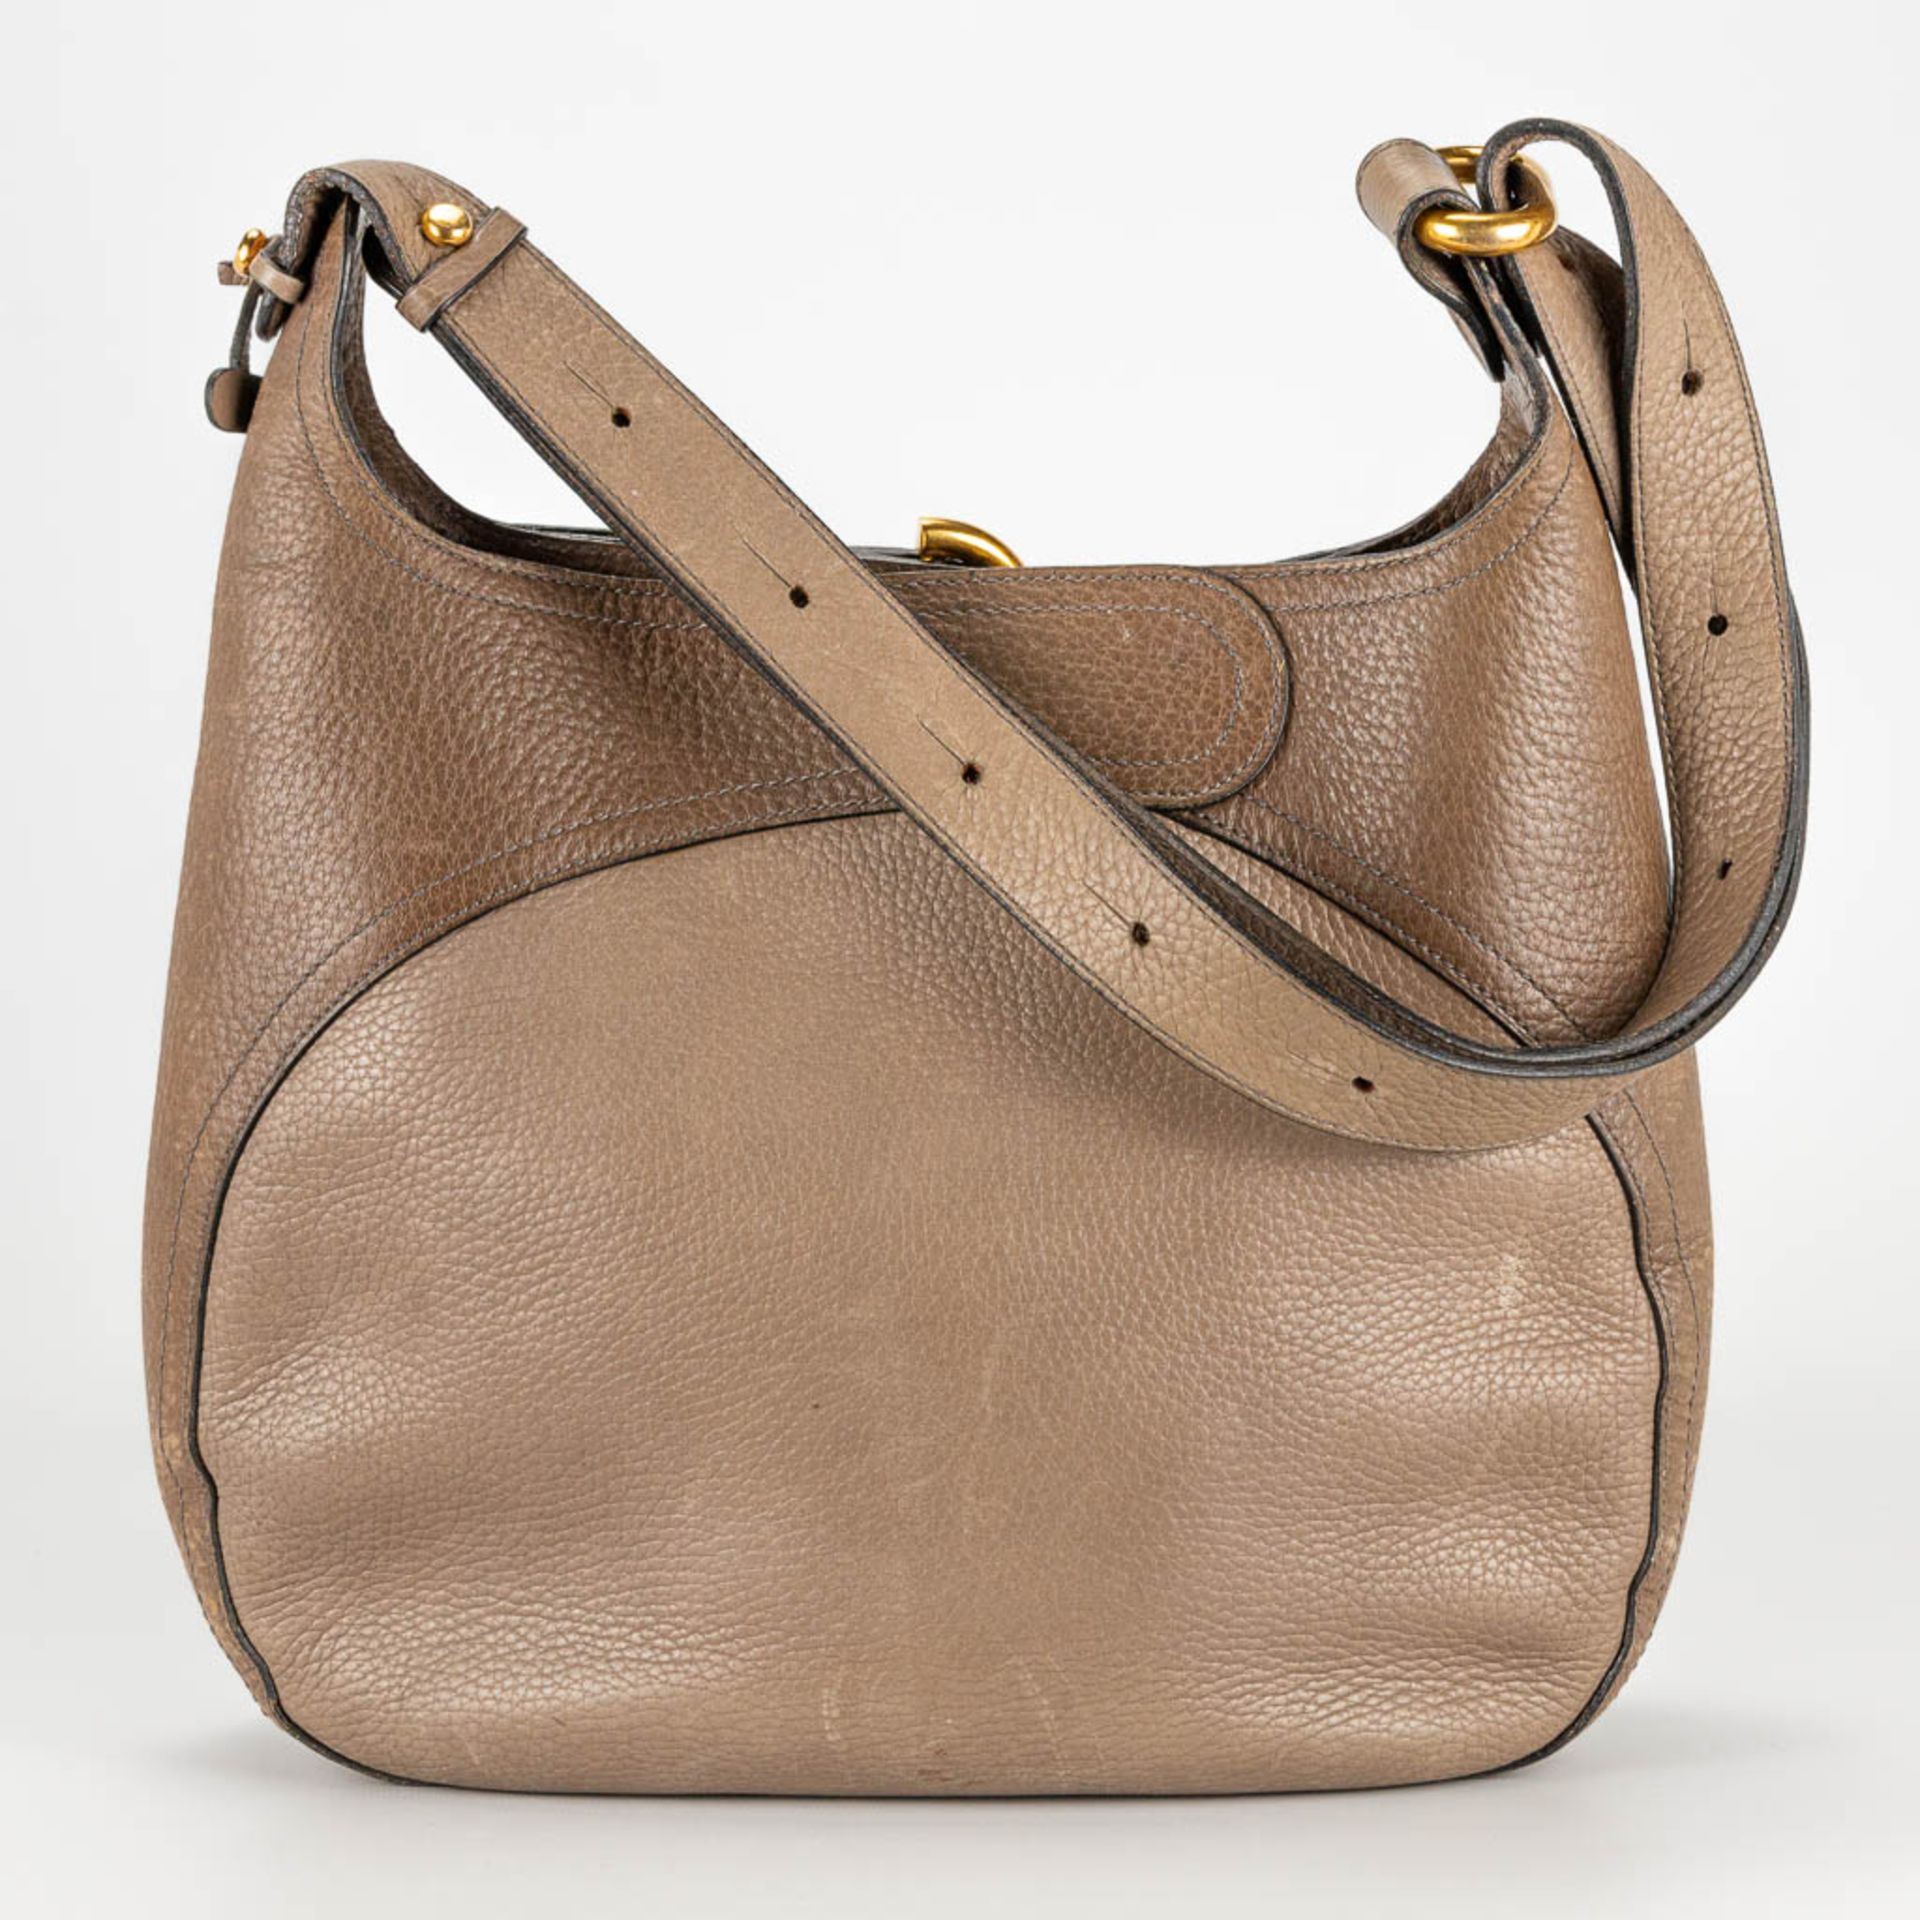 A purse made of brown leather and marked Delvaux. - Image 9 of 16